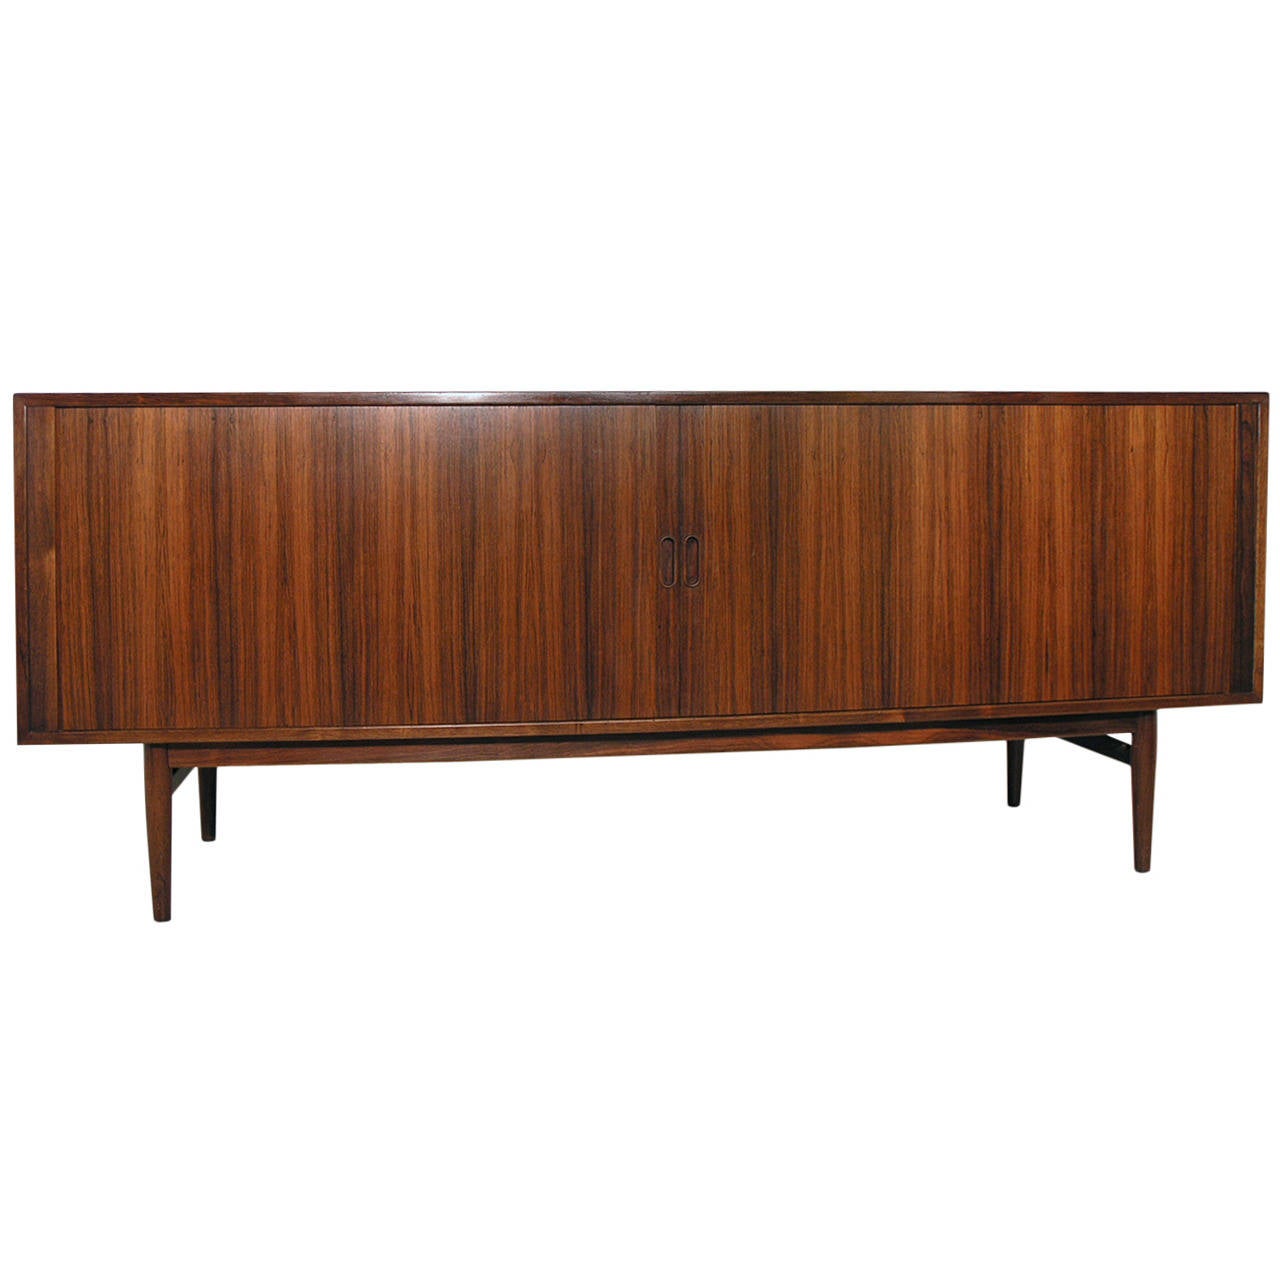 Danish Rosewood Tambour Sideboard by Arne Vodder for Sibast For Sale